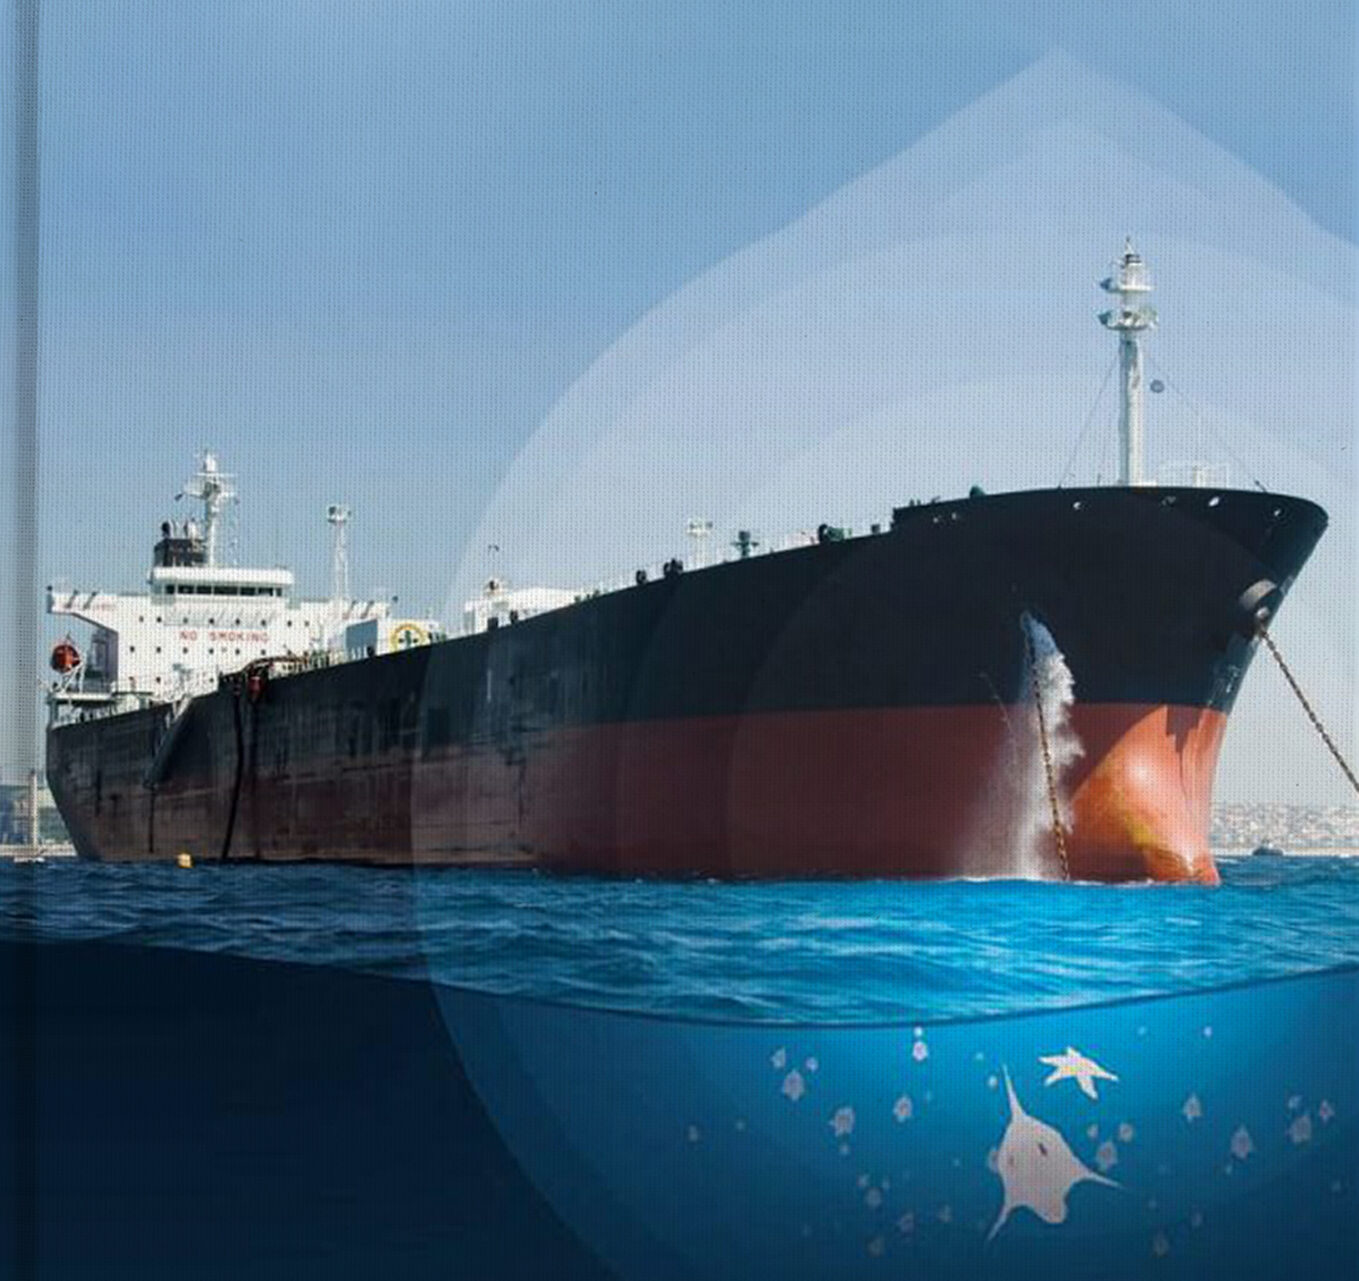 Ballast water management & treatment systems